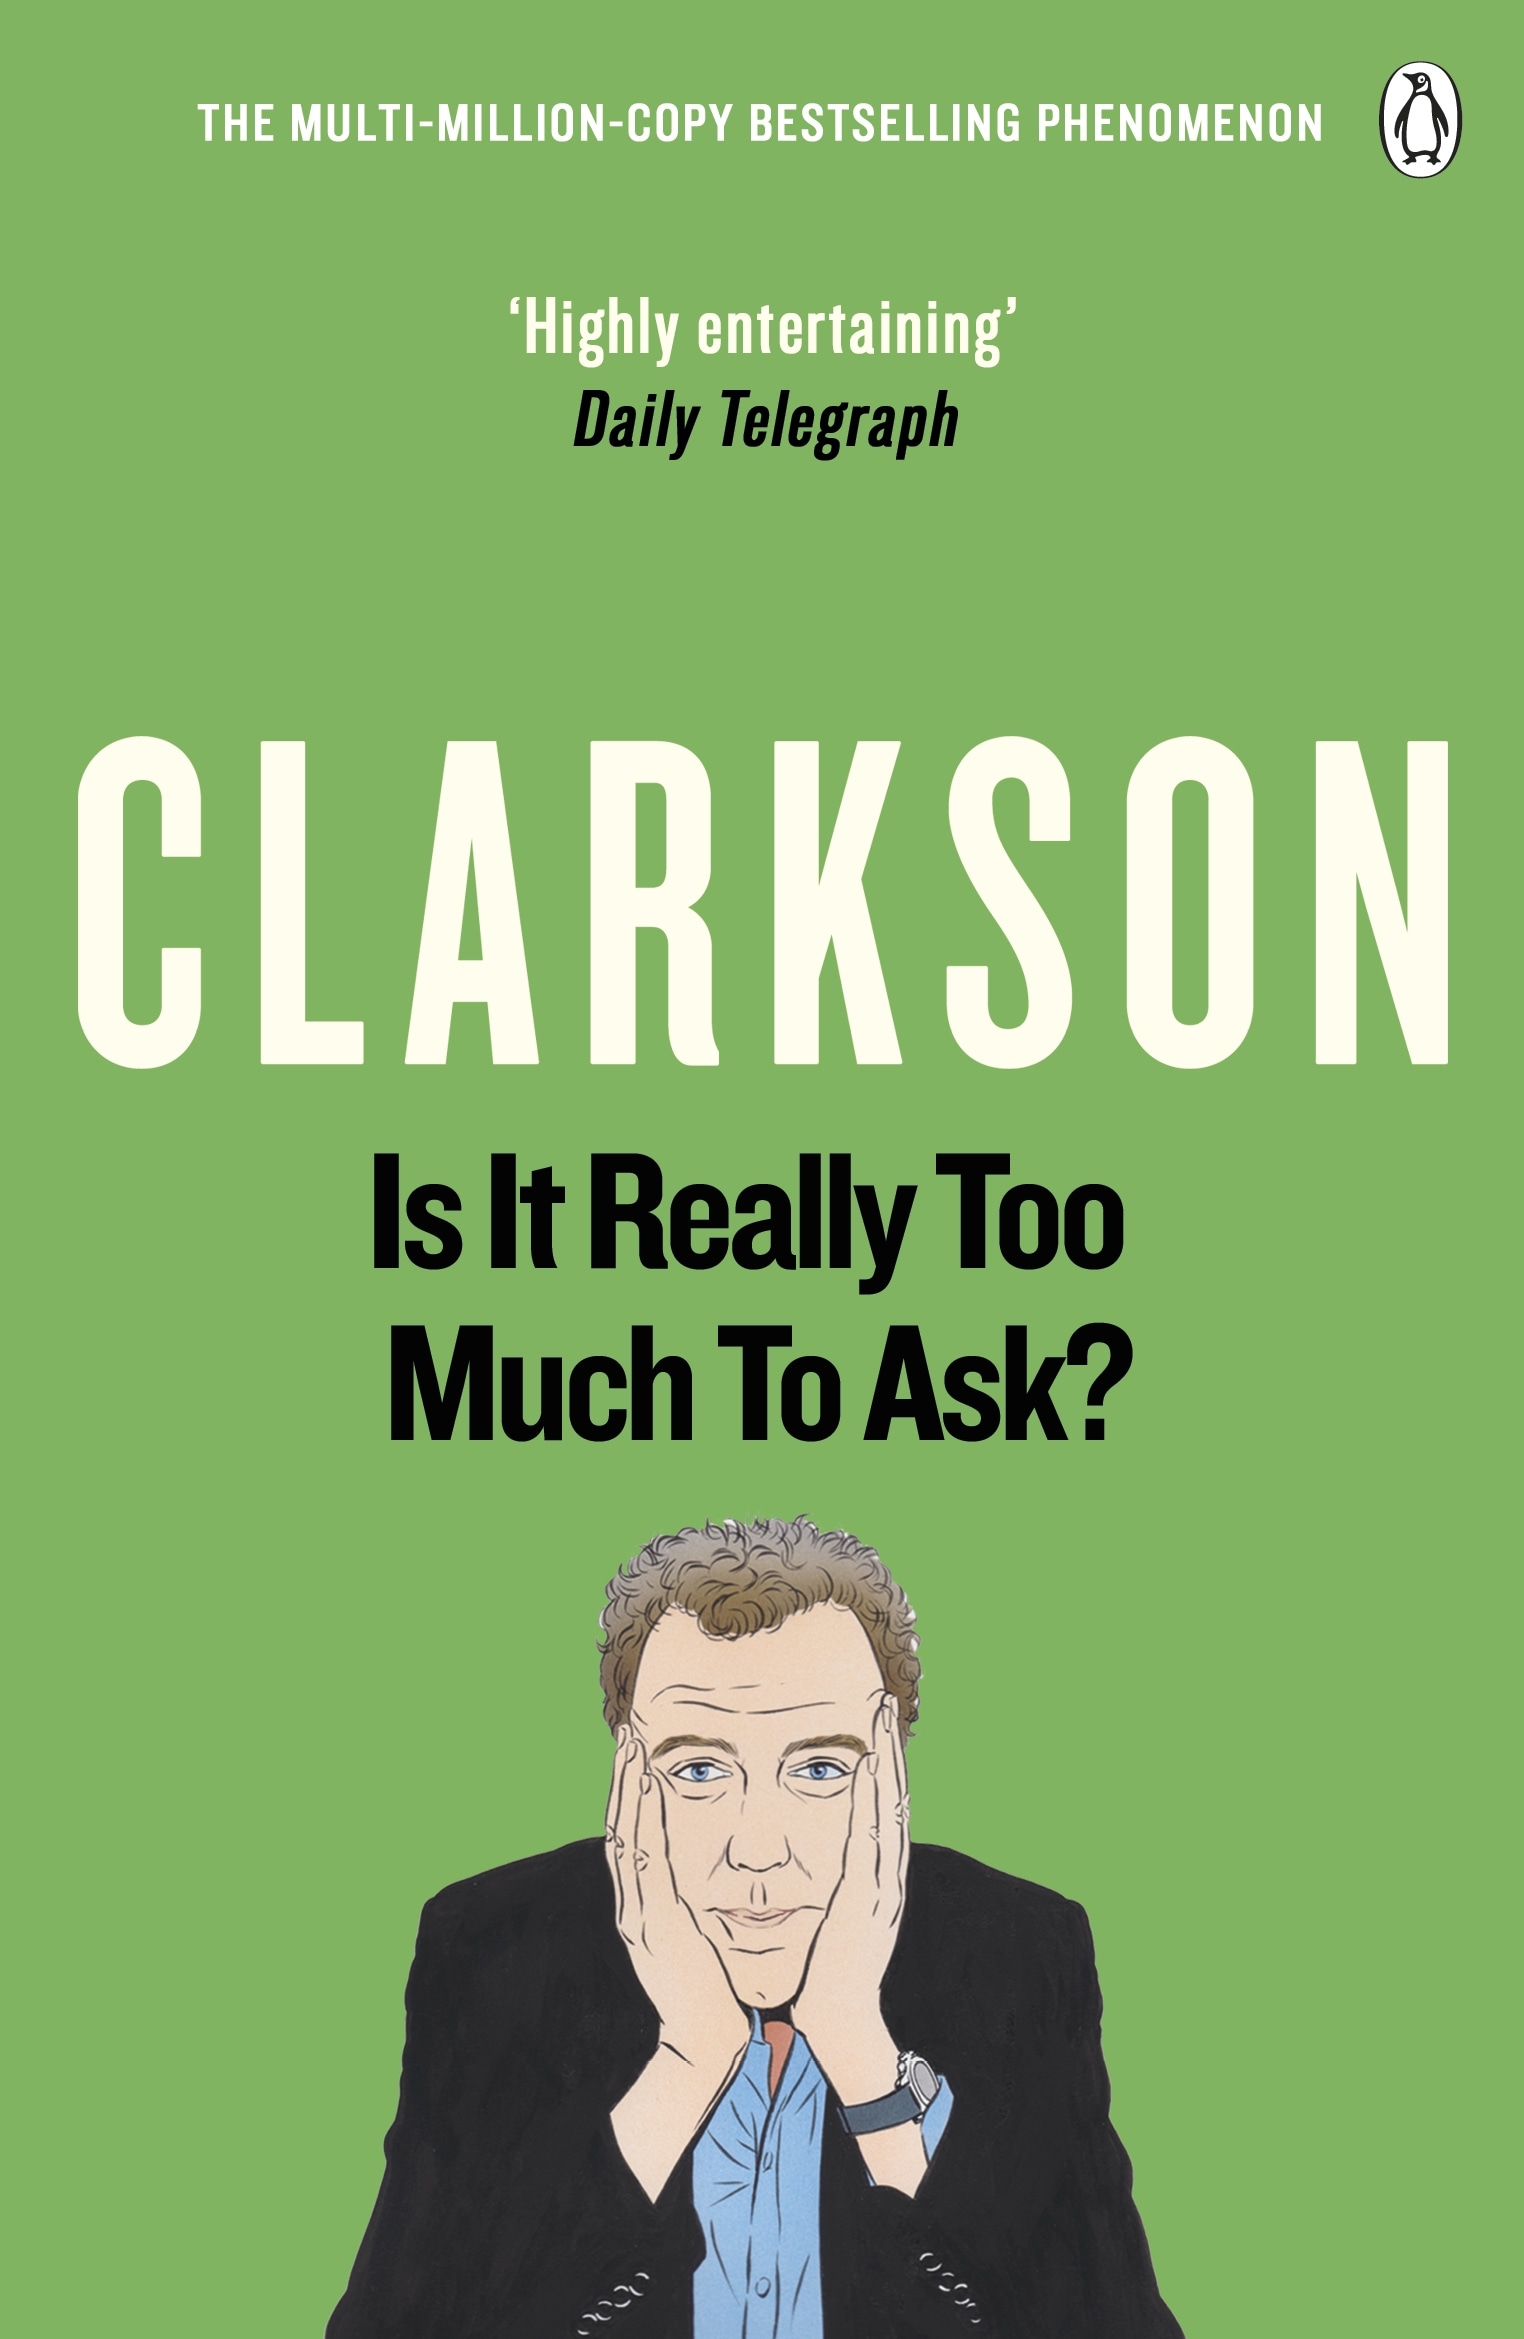 Book “Is It Really Too Much To Ask?” by Jeremy Clarkson — May 22, 2014